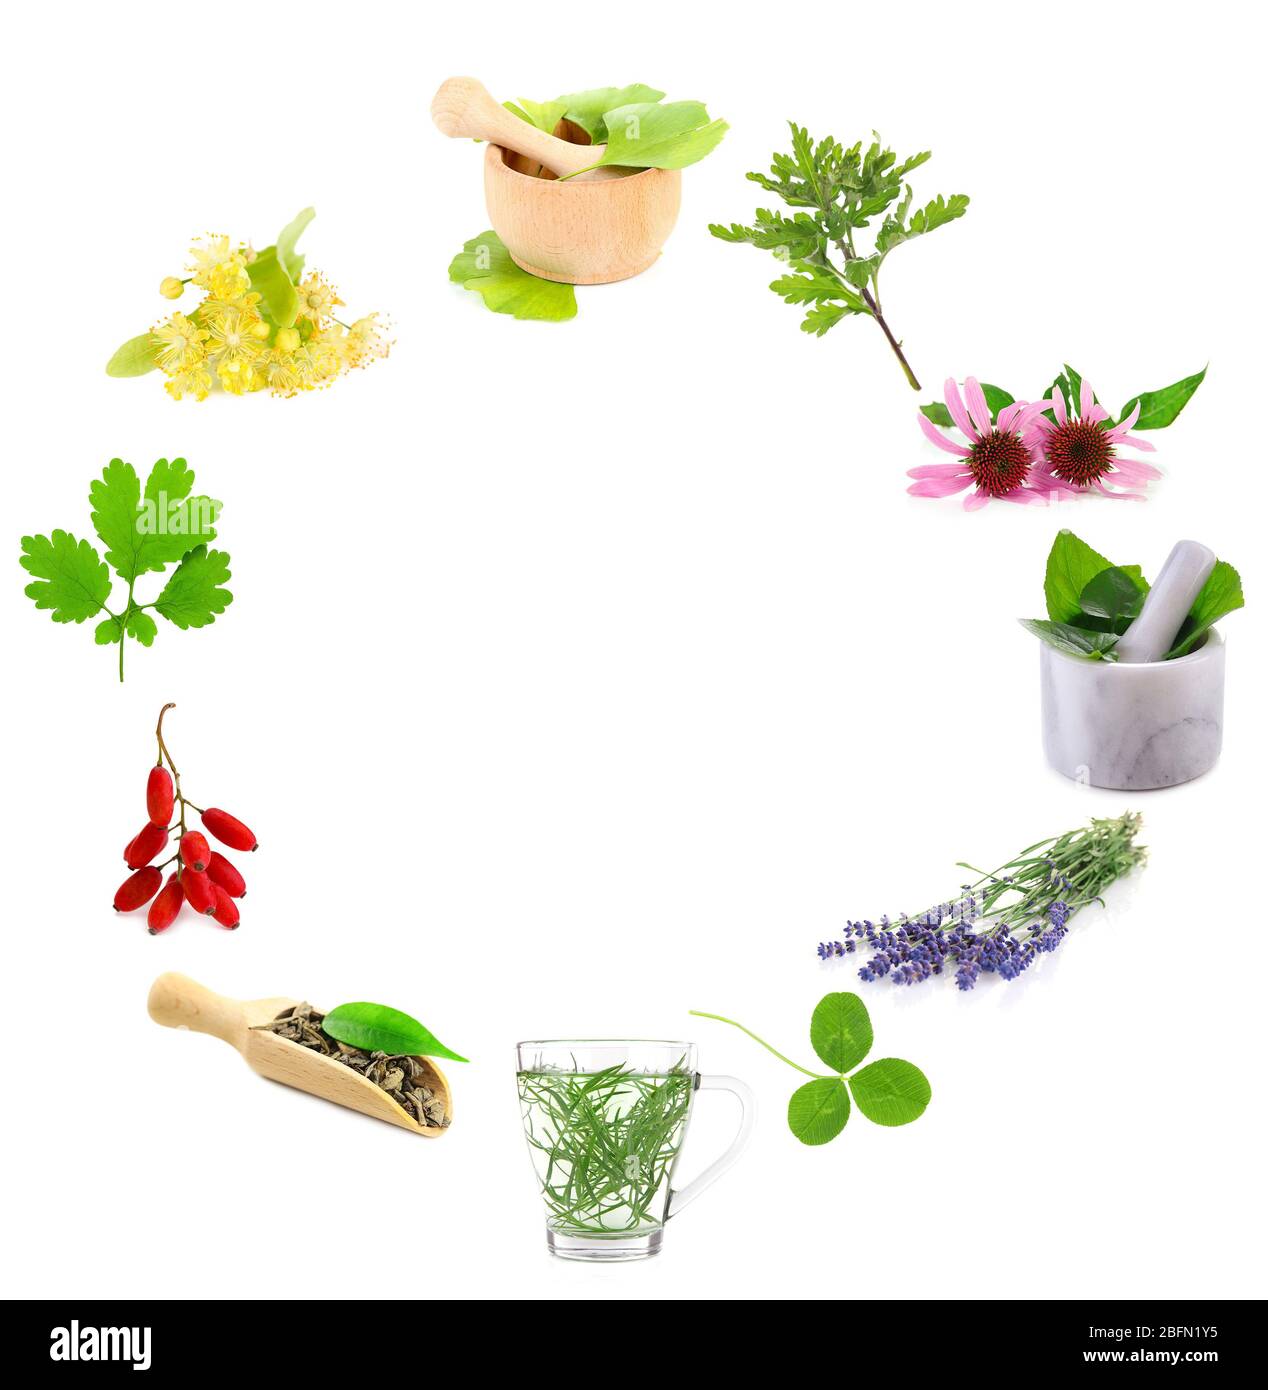 Collage of medicinal herbs isolated on white Stock Photo